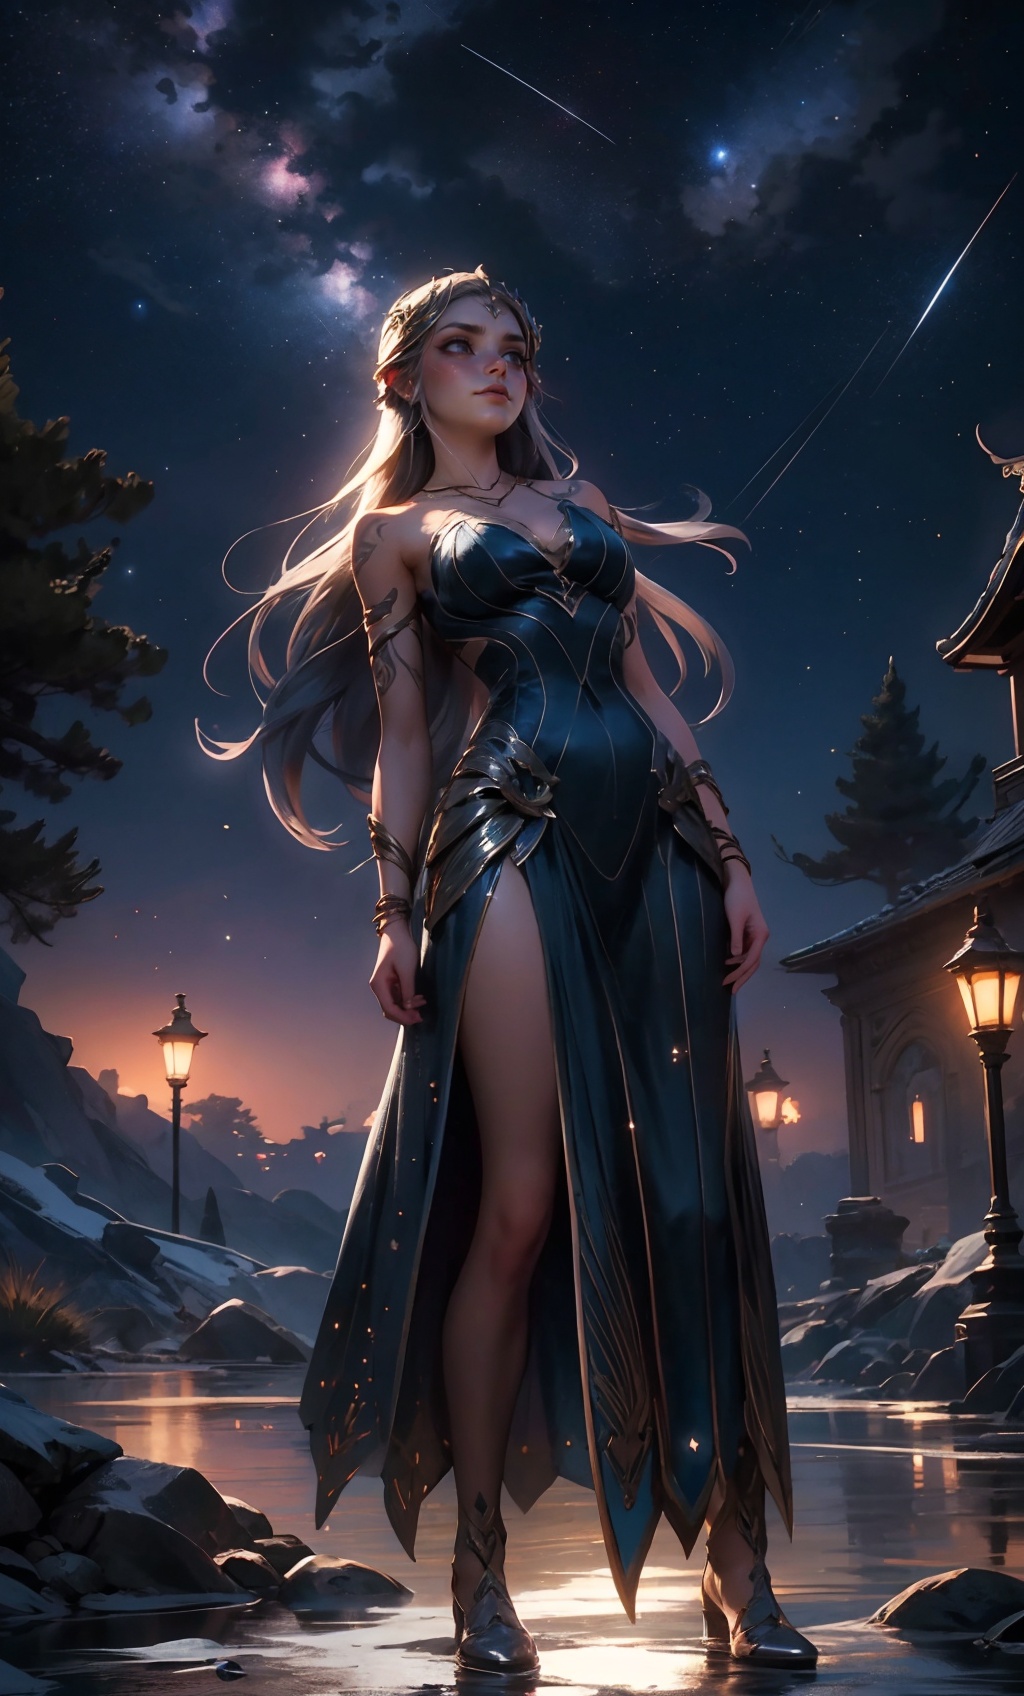 officialart,unity8kwallpaper,ultradetailed,beautifulandaesthetic,beautiful,masterpiece,bestquality,(the gloomy night:1.3),night sky,Sparkling stars all over the sky,dynamicangle,cowboyshot,from below,elegant,abrutalistdesigned,vividcolours,romanticism,atmospheric,1girl,qinyaoR,long hair,Flying Hair,sad,<lora:秦瑶QinyaoR5-000008:0.65>,(the background is Beautiful starry sky:1.2),(Shining Star River:1.2),Stars in the sky,The water reflects the starry sky,magic flash of fantasy,(Chinese style palace in the background:0.),falls in the distance,frost magic,(beautiful fantasy creatures),(a standing posture of leaning over:1),girl,<lora:20231110-1699606410848:0.2>,<lora:EpicSky:0.2>,